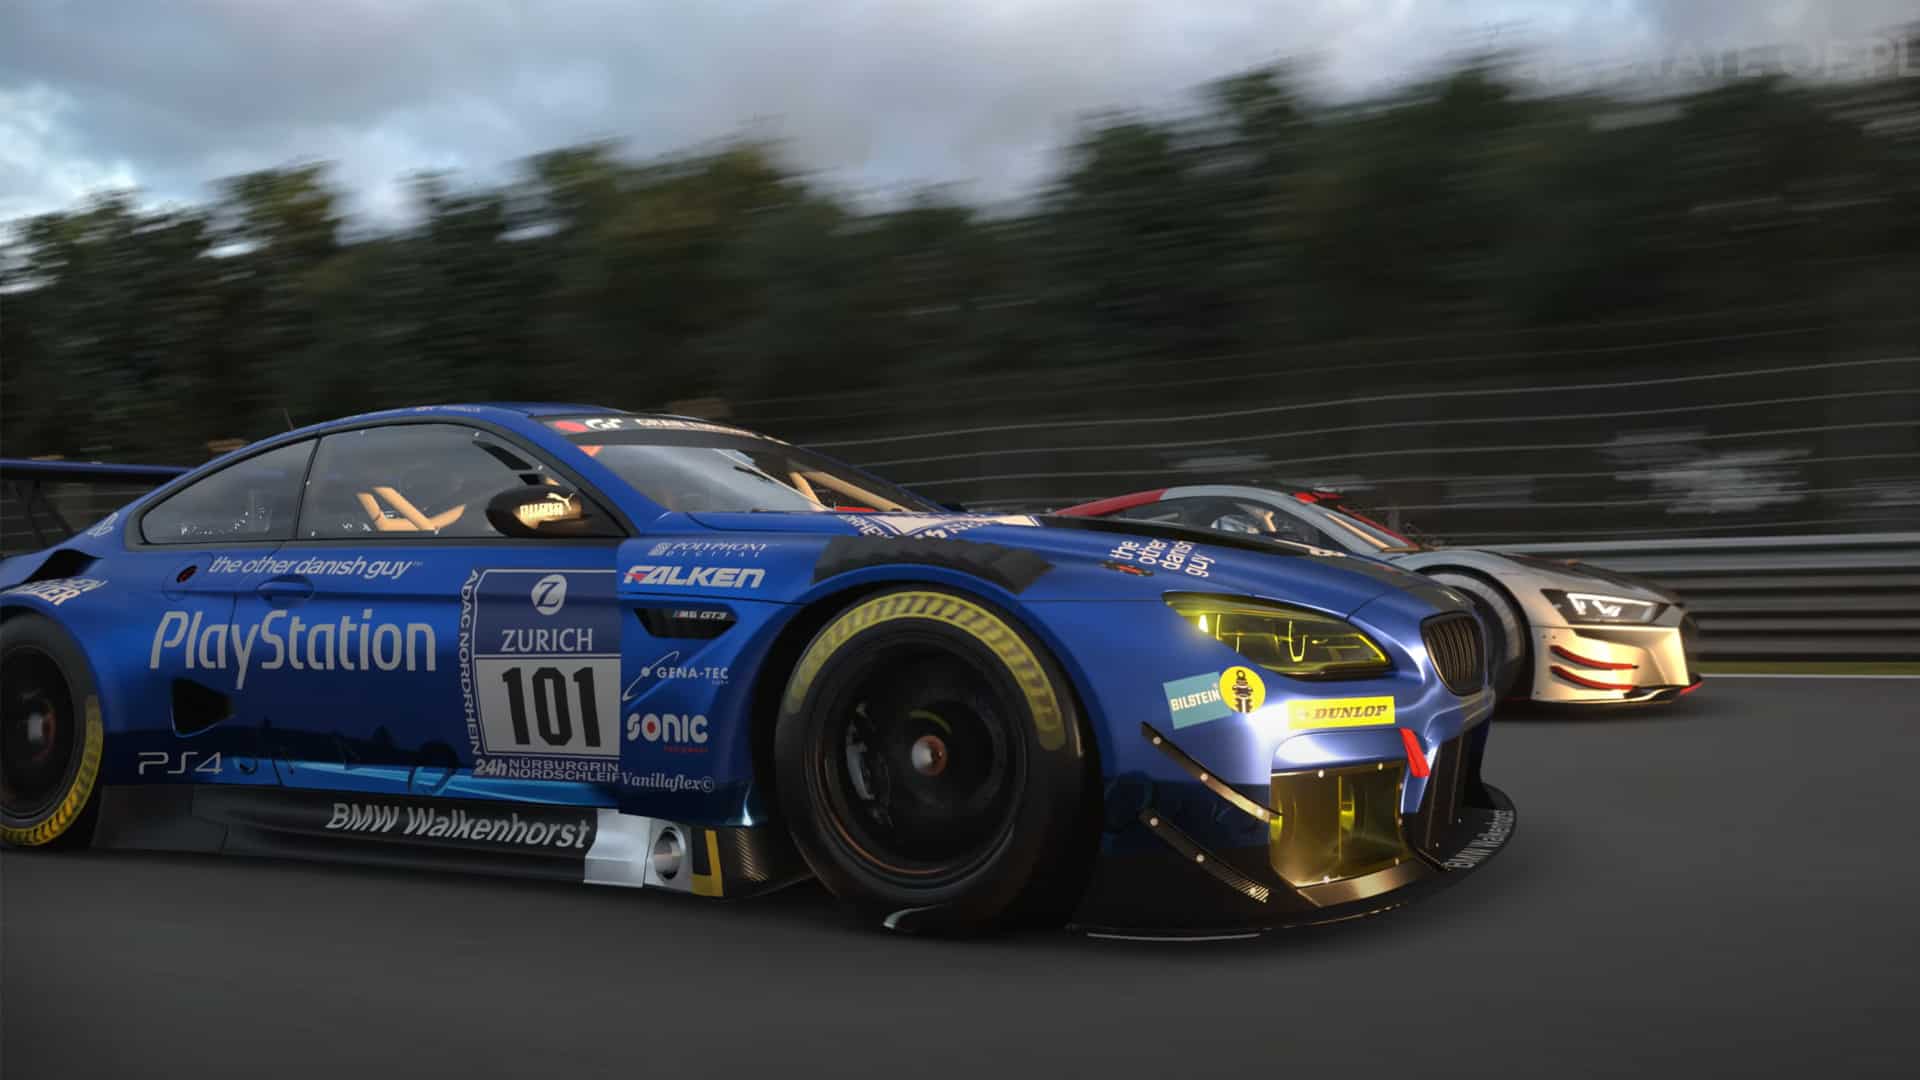 The most significant new features in Gran Turismo 7